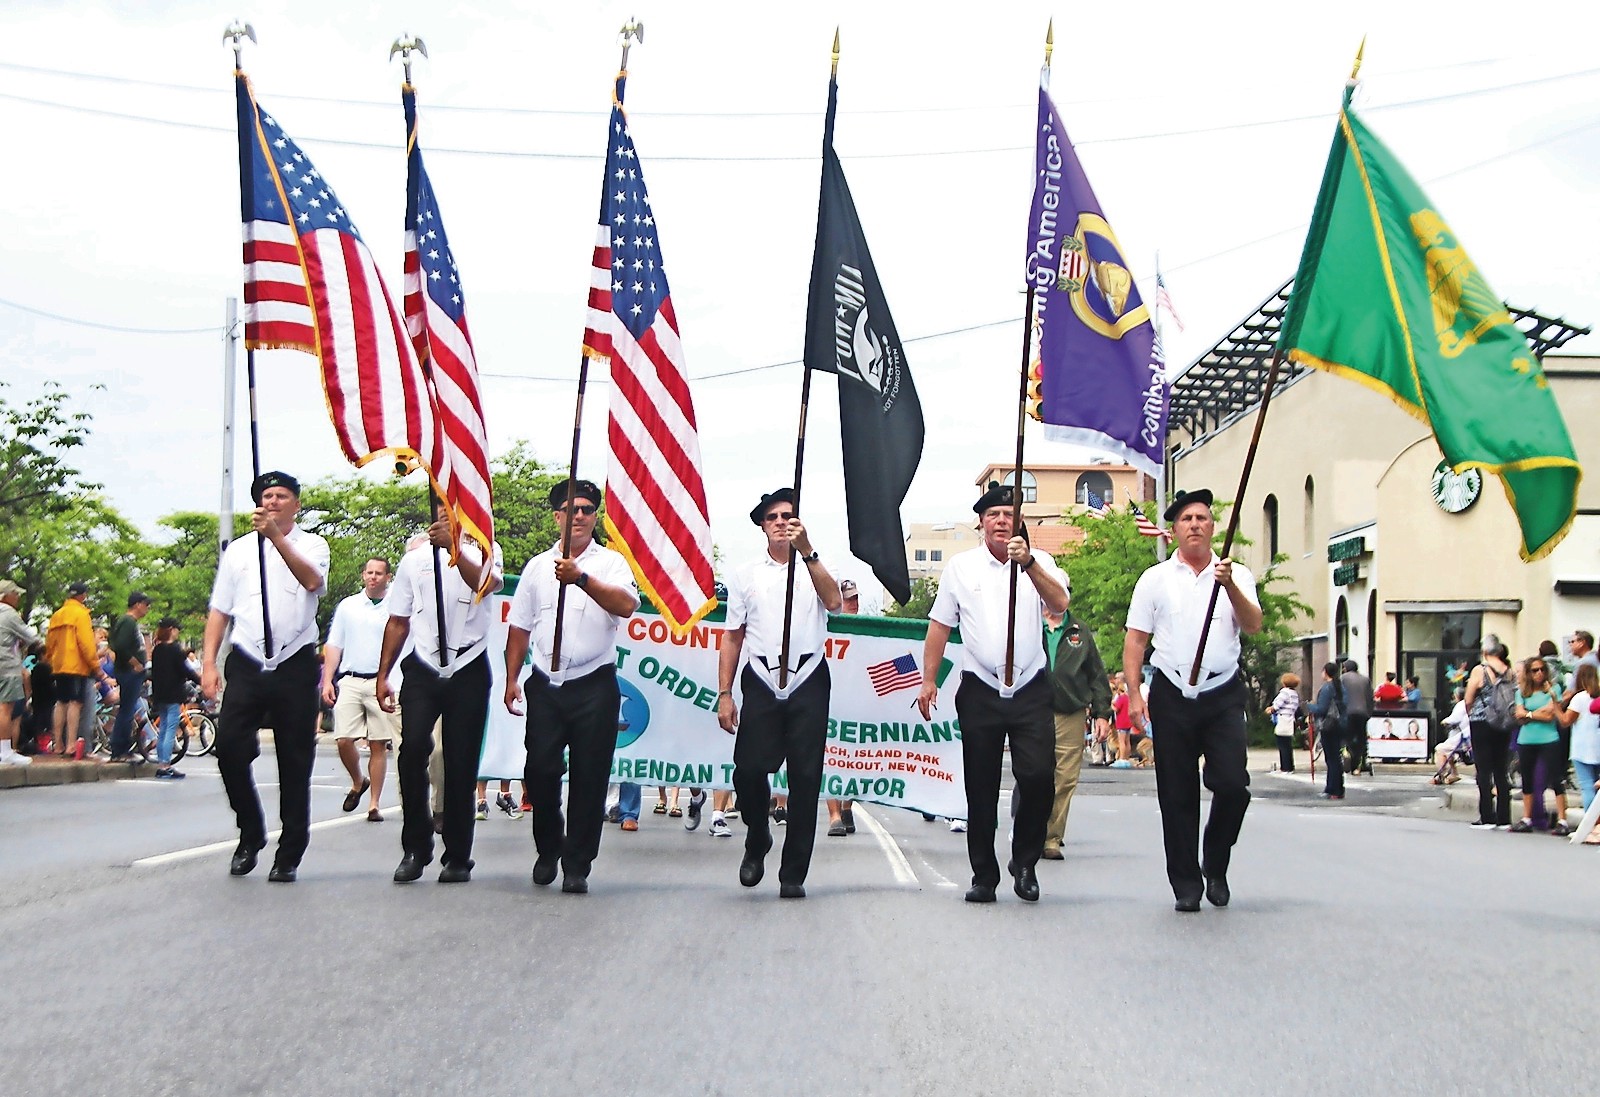 The City of Long Beach will pay tribute to veterans with the annual Memorial Day Parade on Monday, May 29. The parade begins at Ohio Avenue and West Beech Street at 10 a.m. and ends at the reviewing stand on Park Avenue in front of City Hall. The American Legion and Veterans of Foreign Wars will be joined by city, county and state officials.